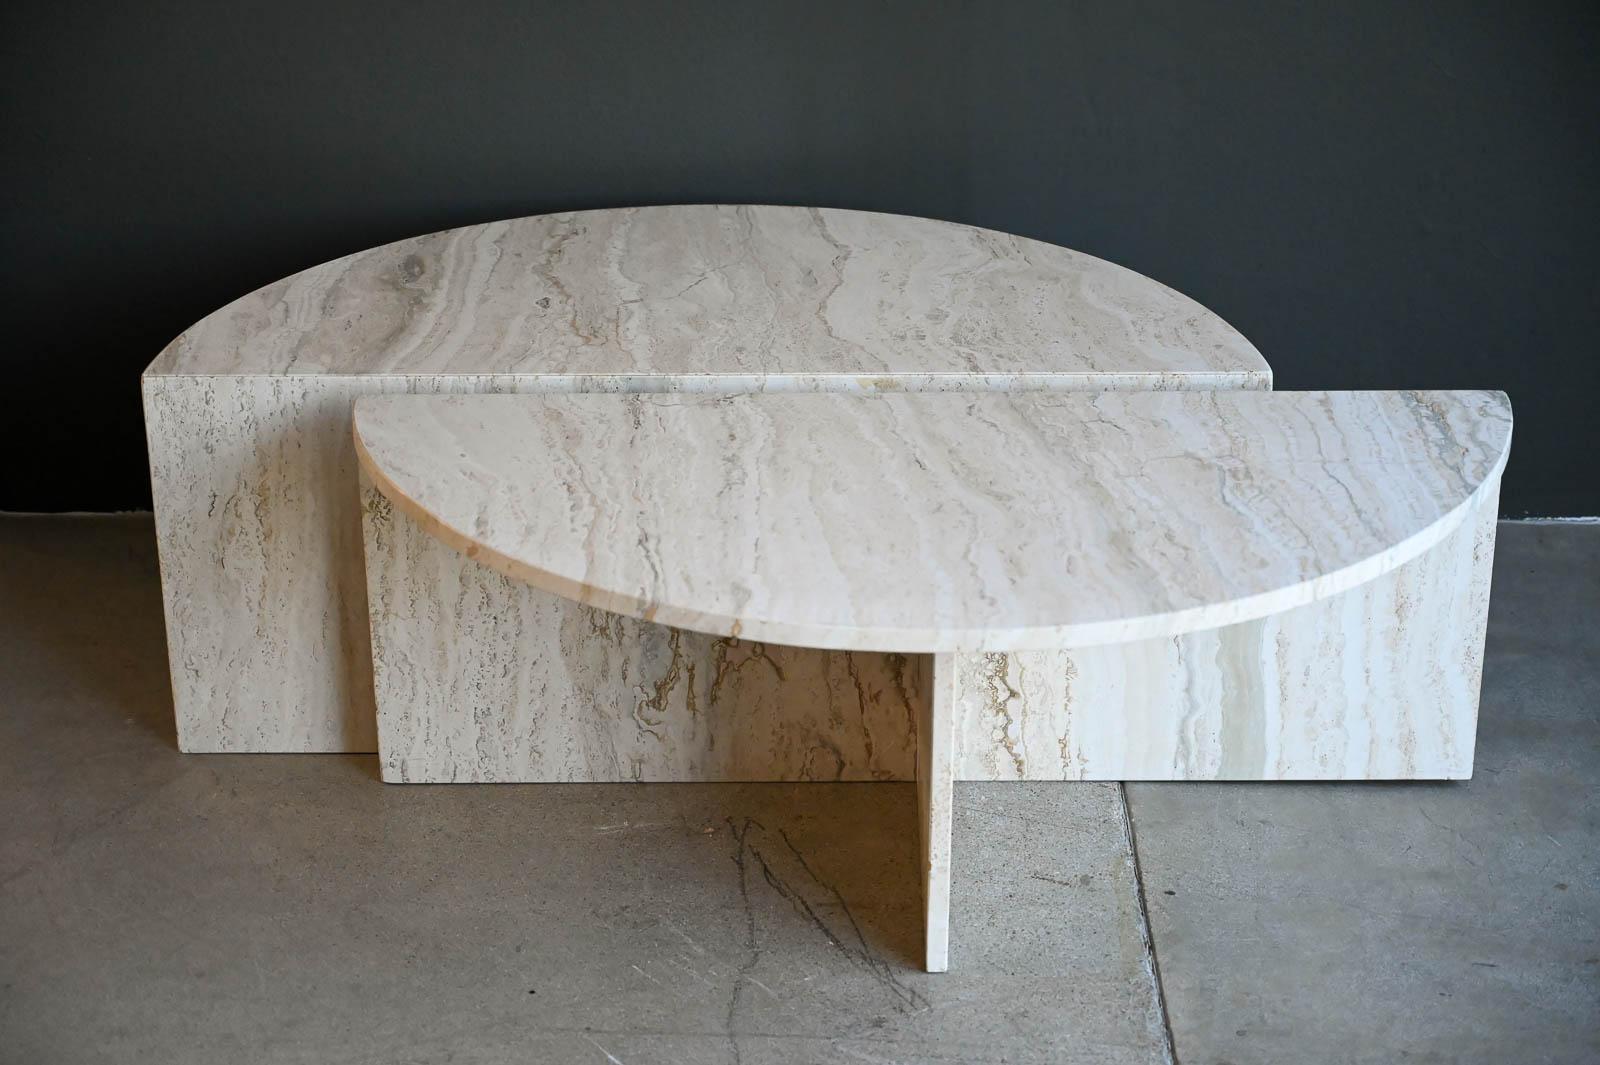 Two Piece Round Travertine Coffee Table Set by Up & Up, ca. 1970 in the style of Angelo Mangiarotti.  Beautiful two piece Italian travertine and two identical pieces that can be pushed together or separated and staggered for a more interesting